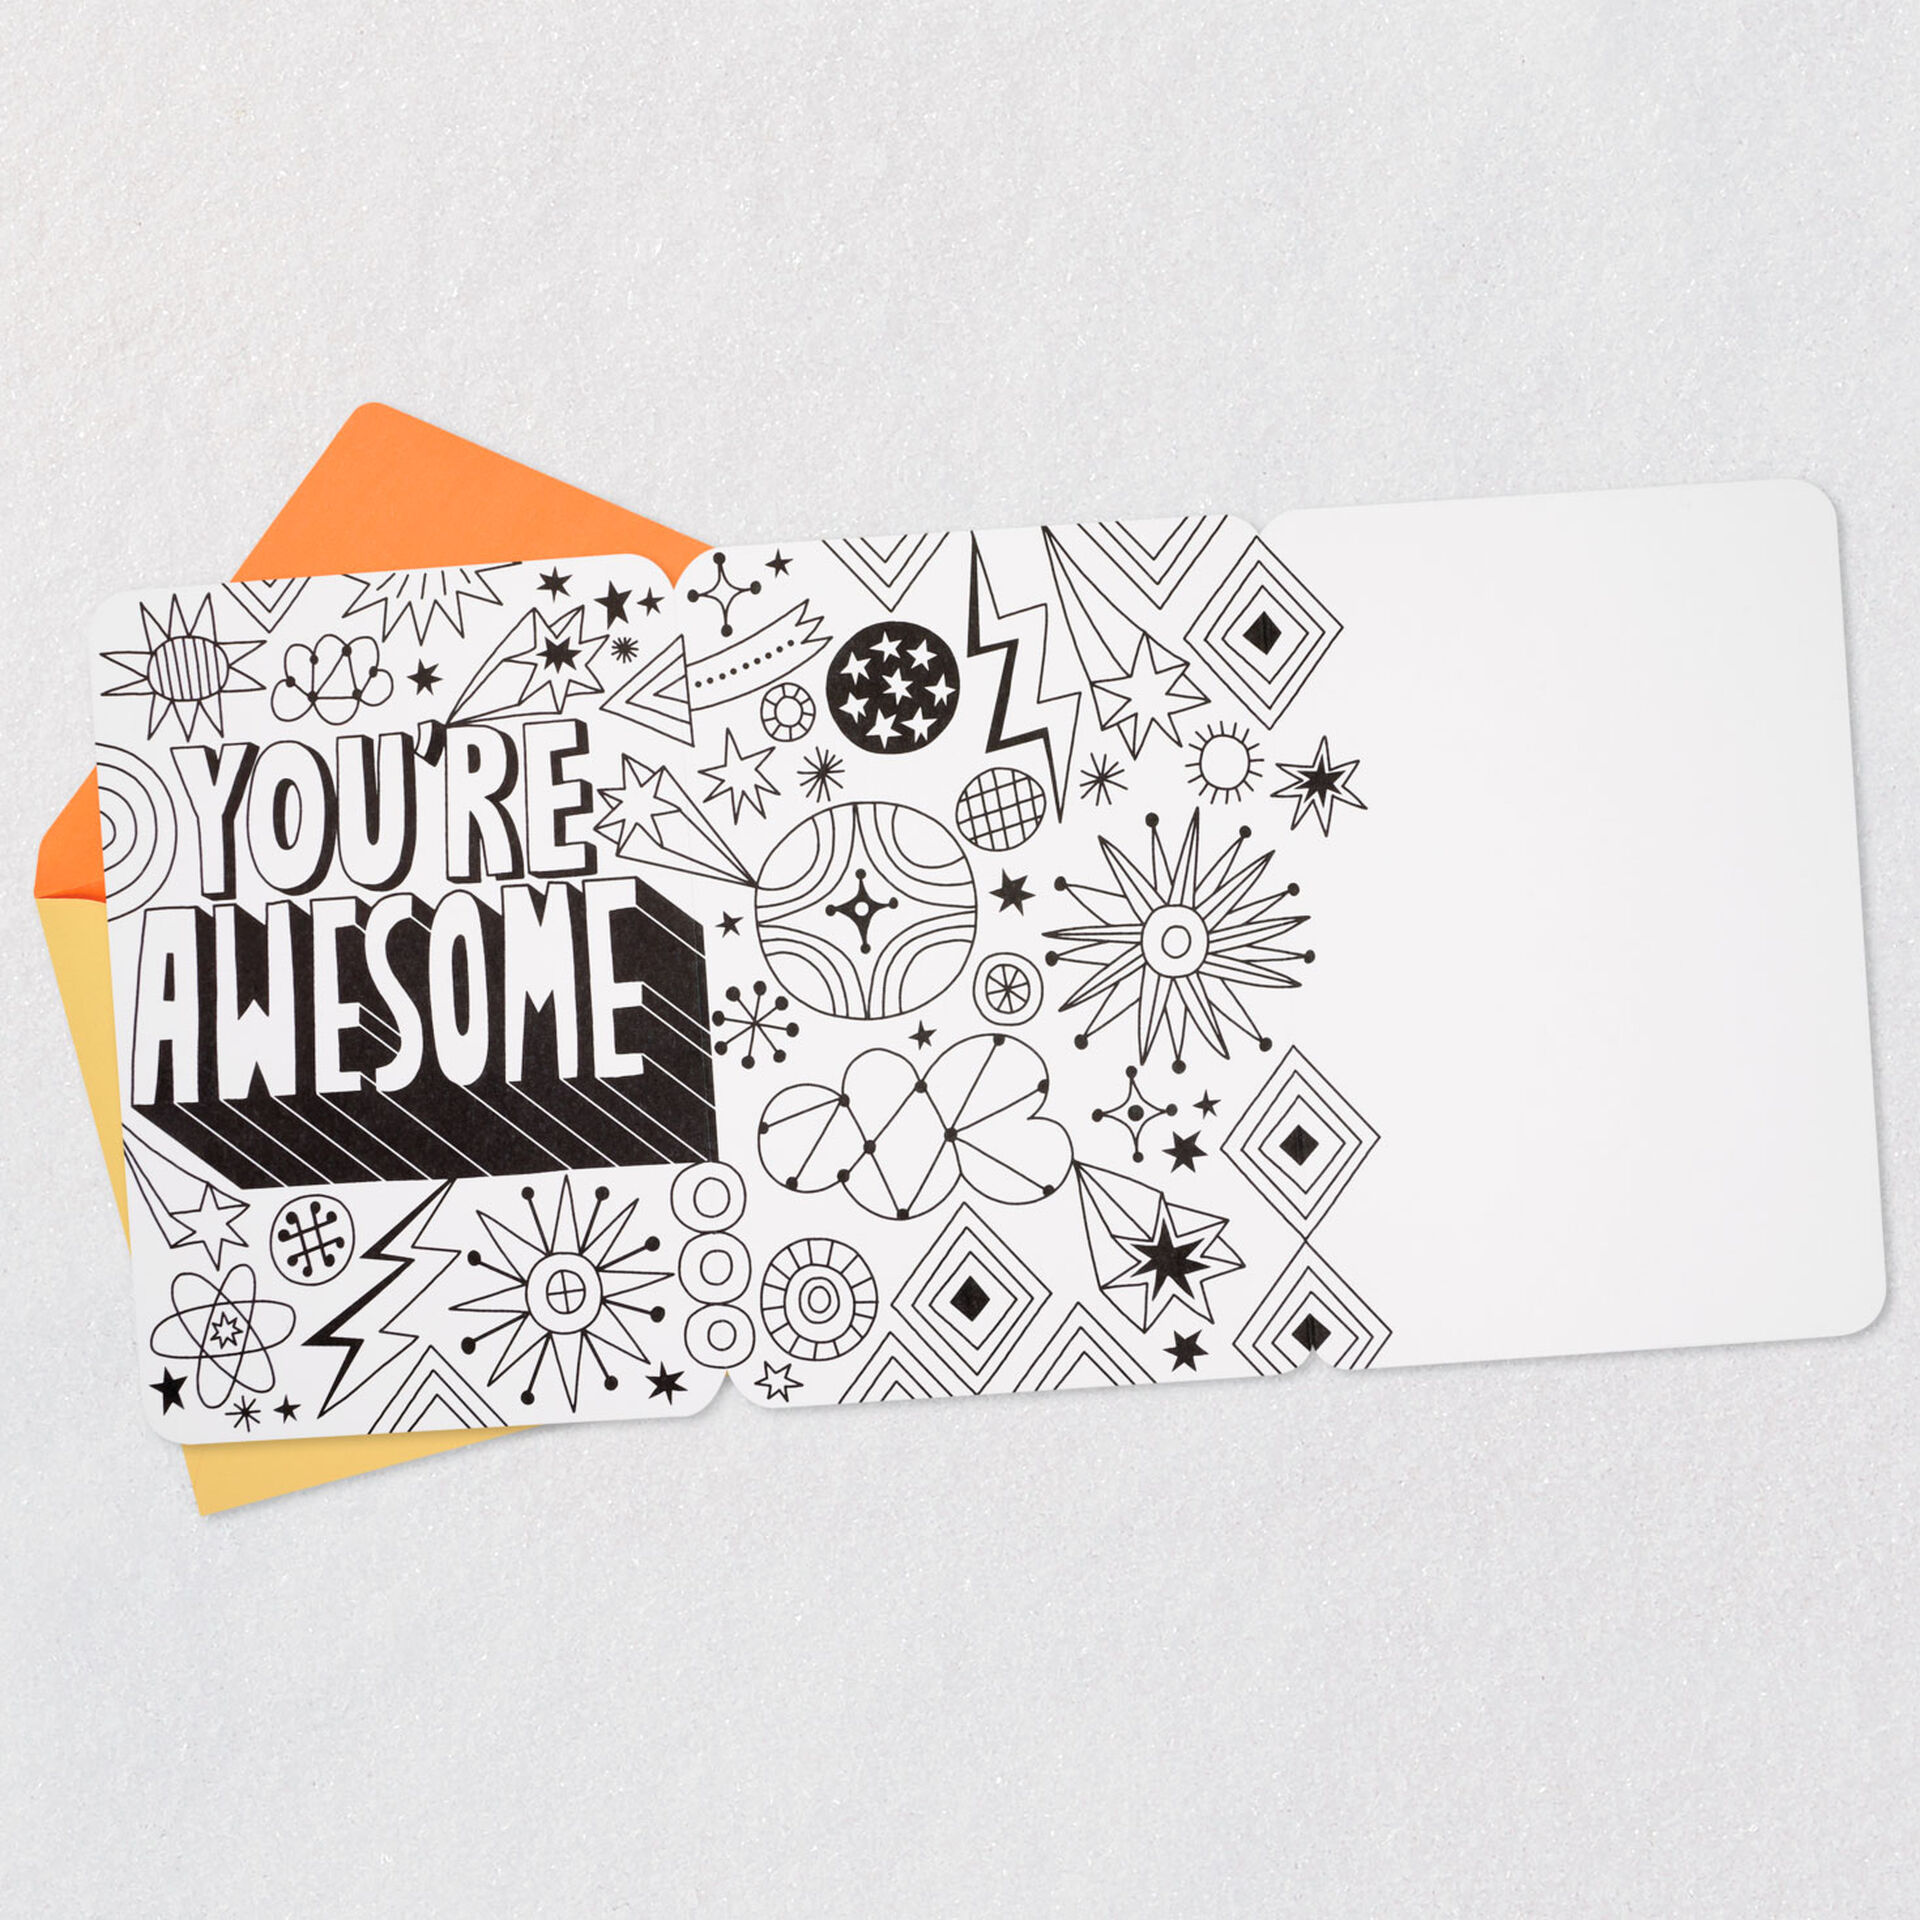 Crayola-Youre-Awesome-Doodles-Blank-Coloring-Card_299RJB2004_03